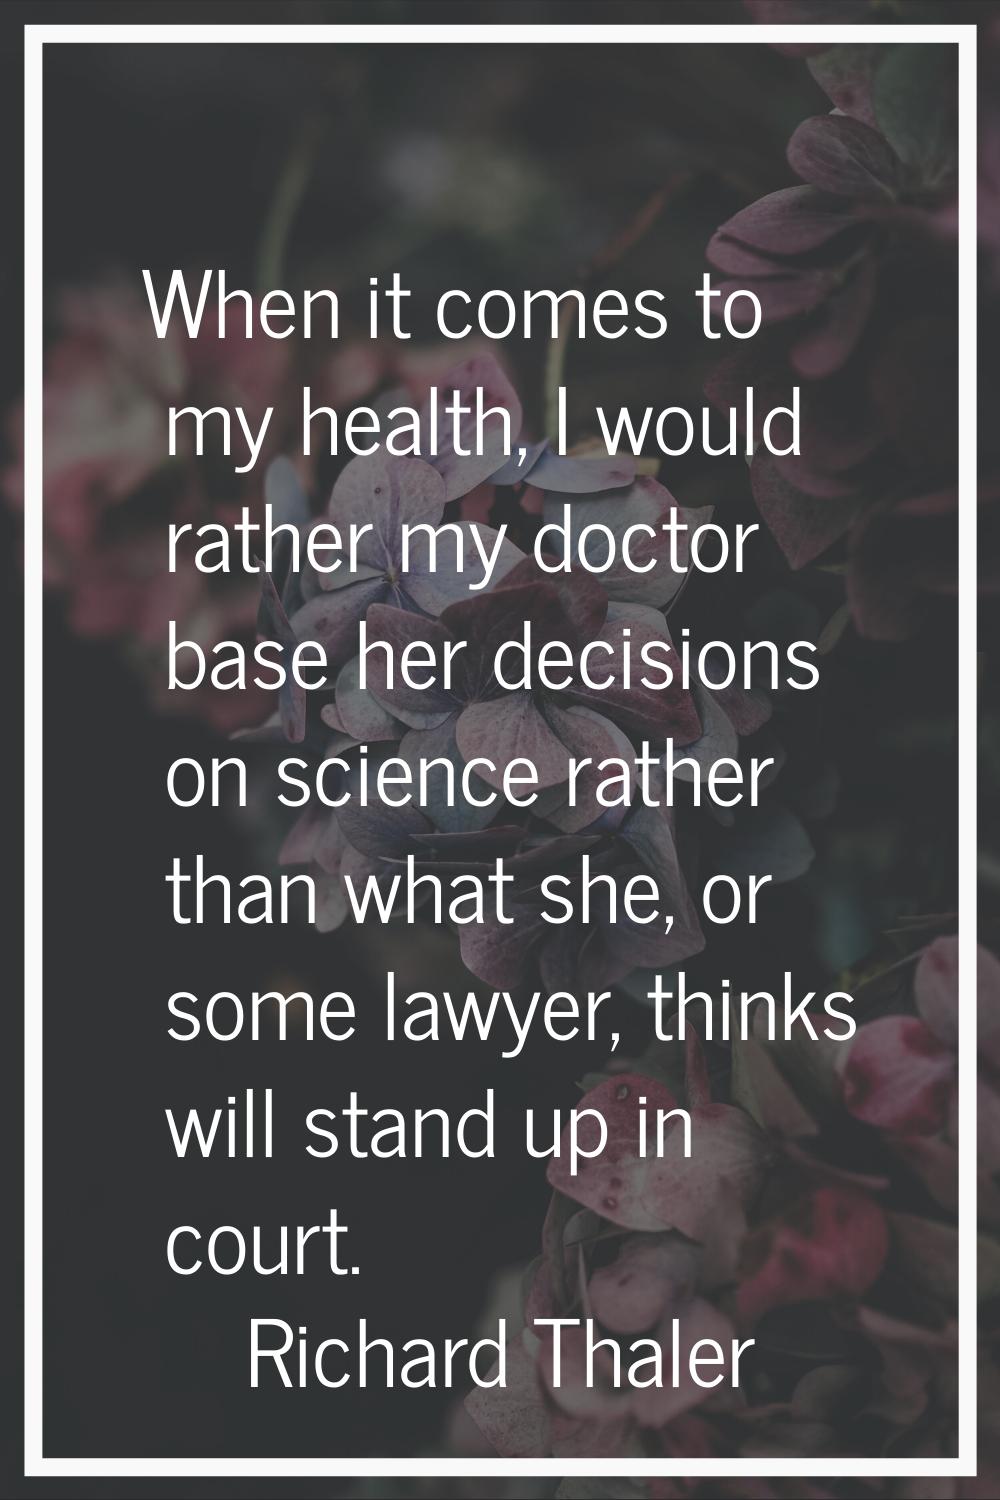 When it comes to my health, I would rather my doctor base her decisions on science rather than what